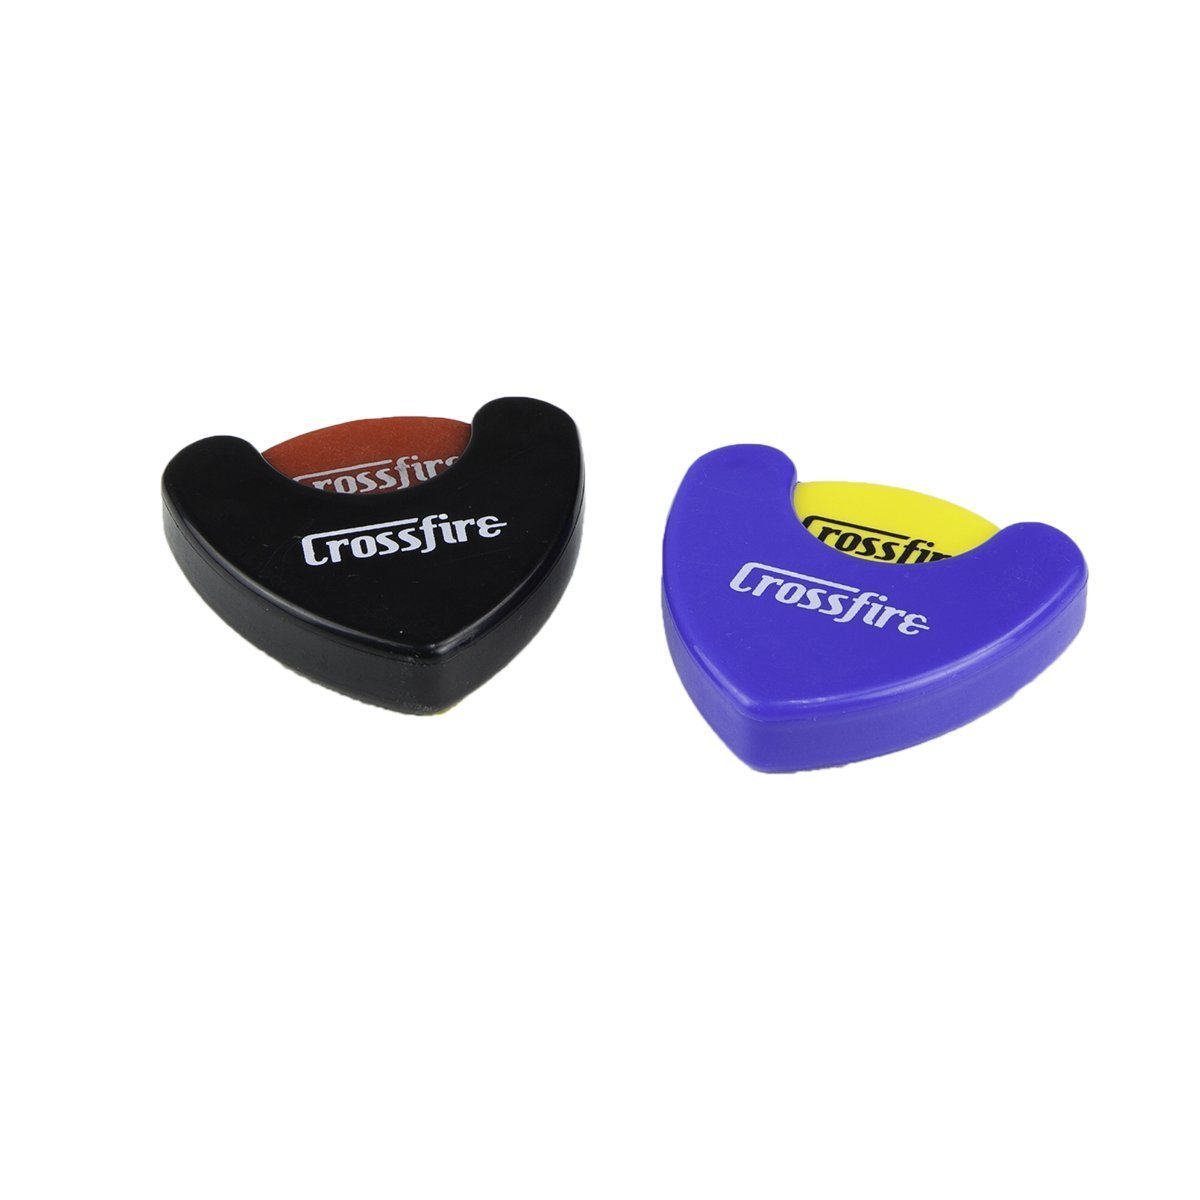 Crossfire Stick On Guitar Pick Holder (2 Pack)-CPH-6-TP